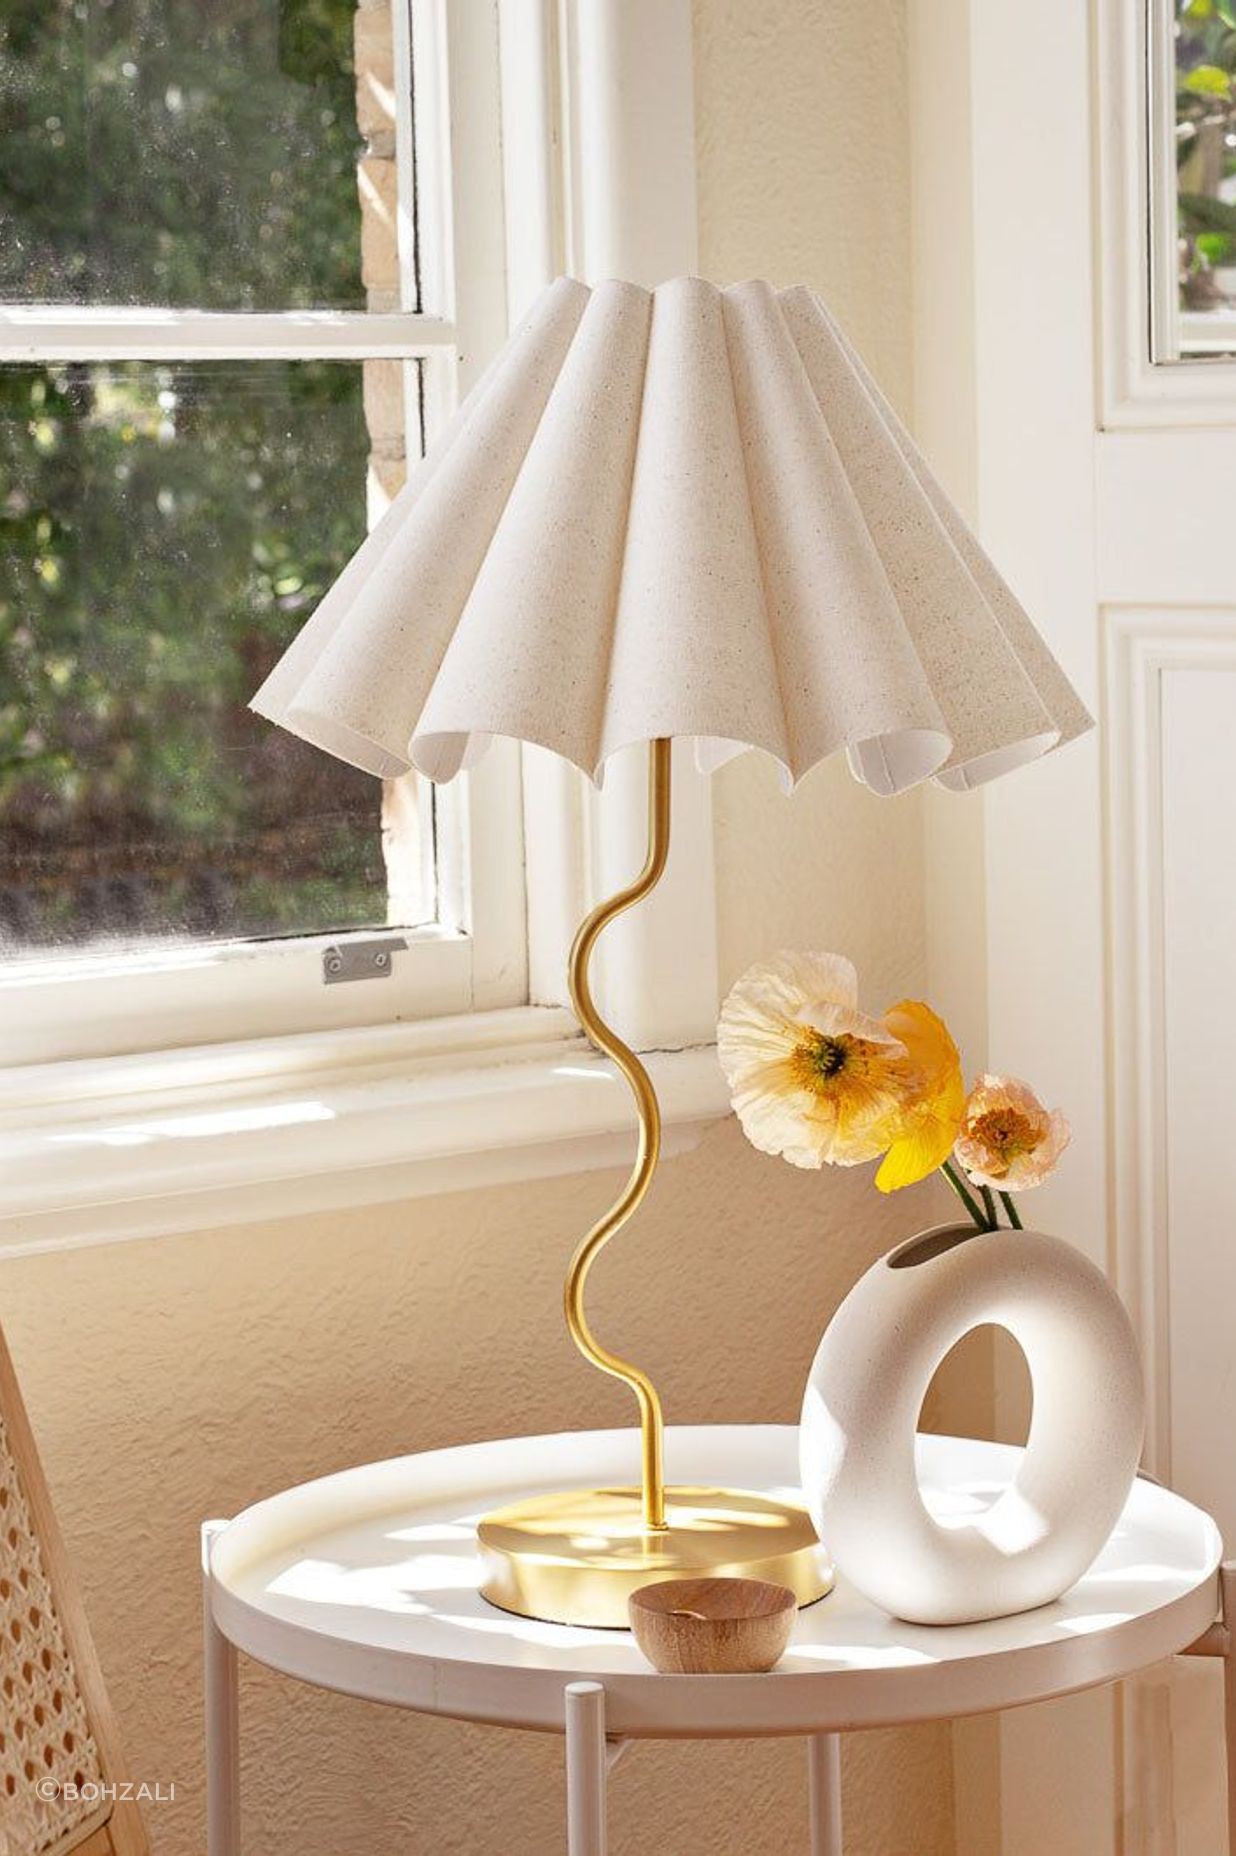 The stunning Paolo &amp; Joy Cora Table Lamp with its vintage-inspired fluted lampshade and brass-plated squiggly base